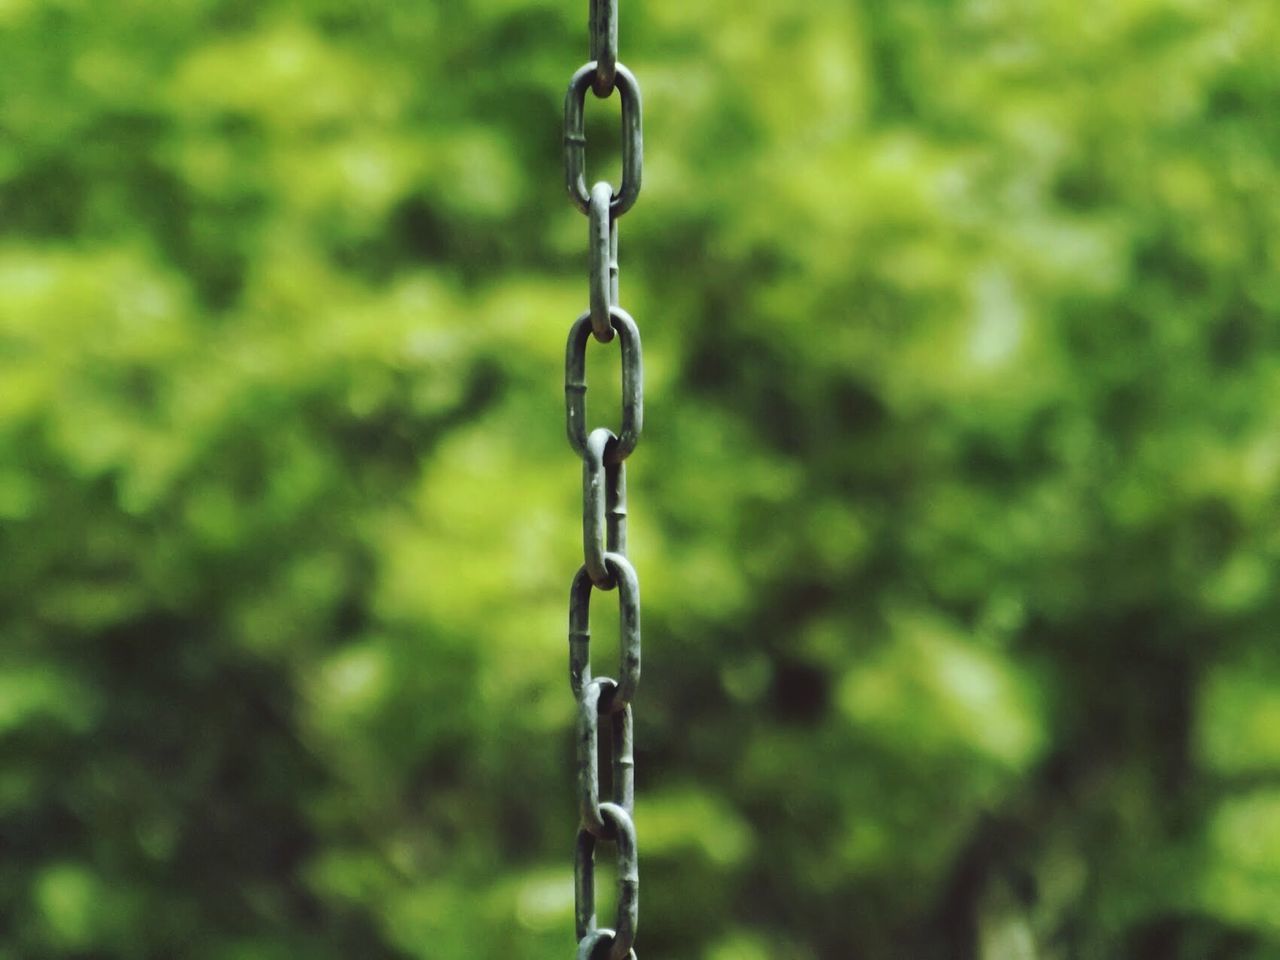 focus on foreground, close-up, selective focus, metal, hanging, green color, water, shiny, day, drop, no people, outdoors, nature, motion, wet, metallic, transparent, reflection, still life, purity